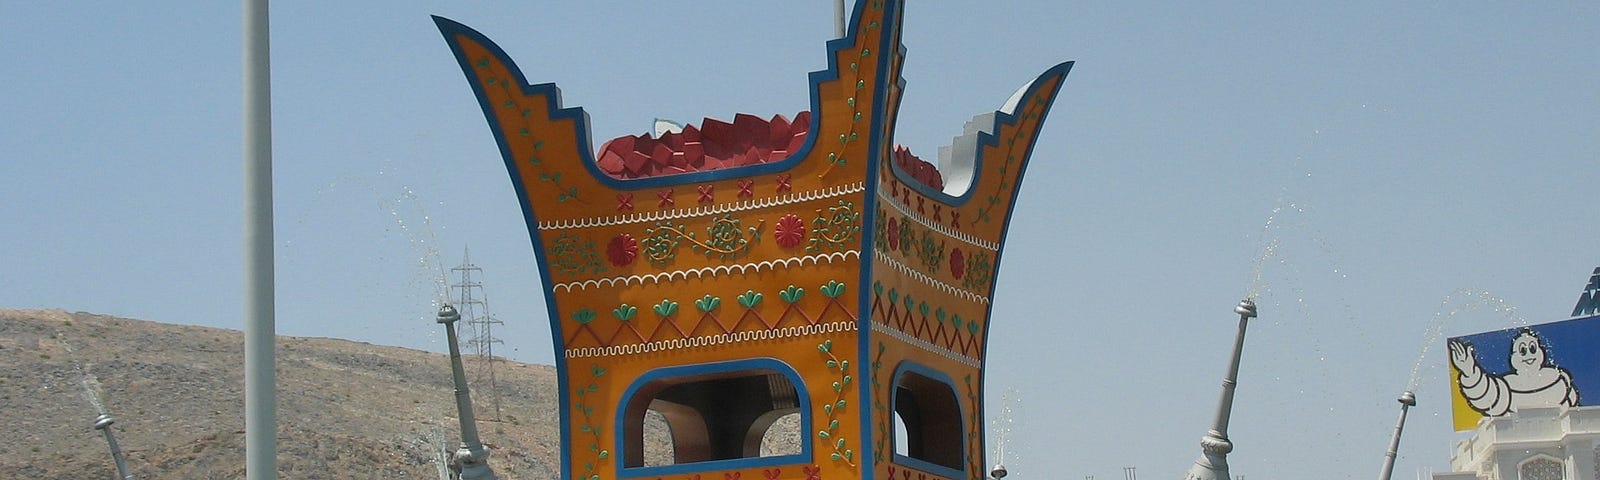 Traffic circle with a tall replica of a traditional Omani incense burner, painted orange with decorations of creepers, surrounded by large silver sprinklers acting as water fountains